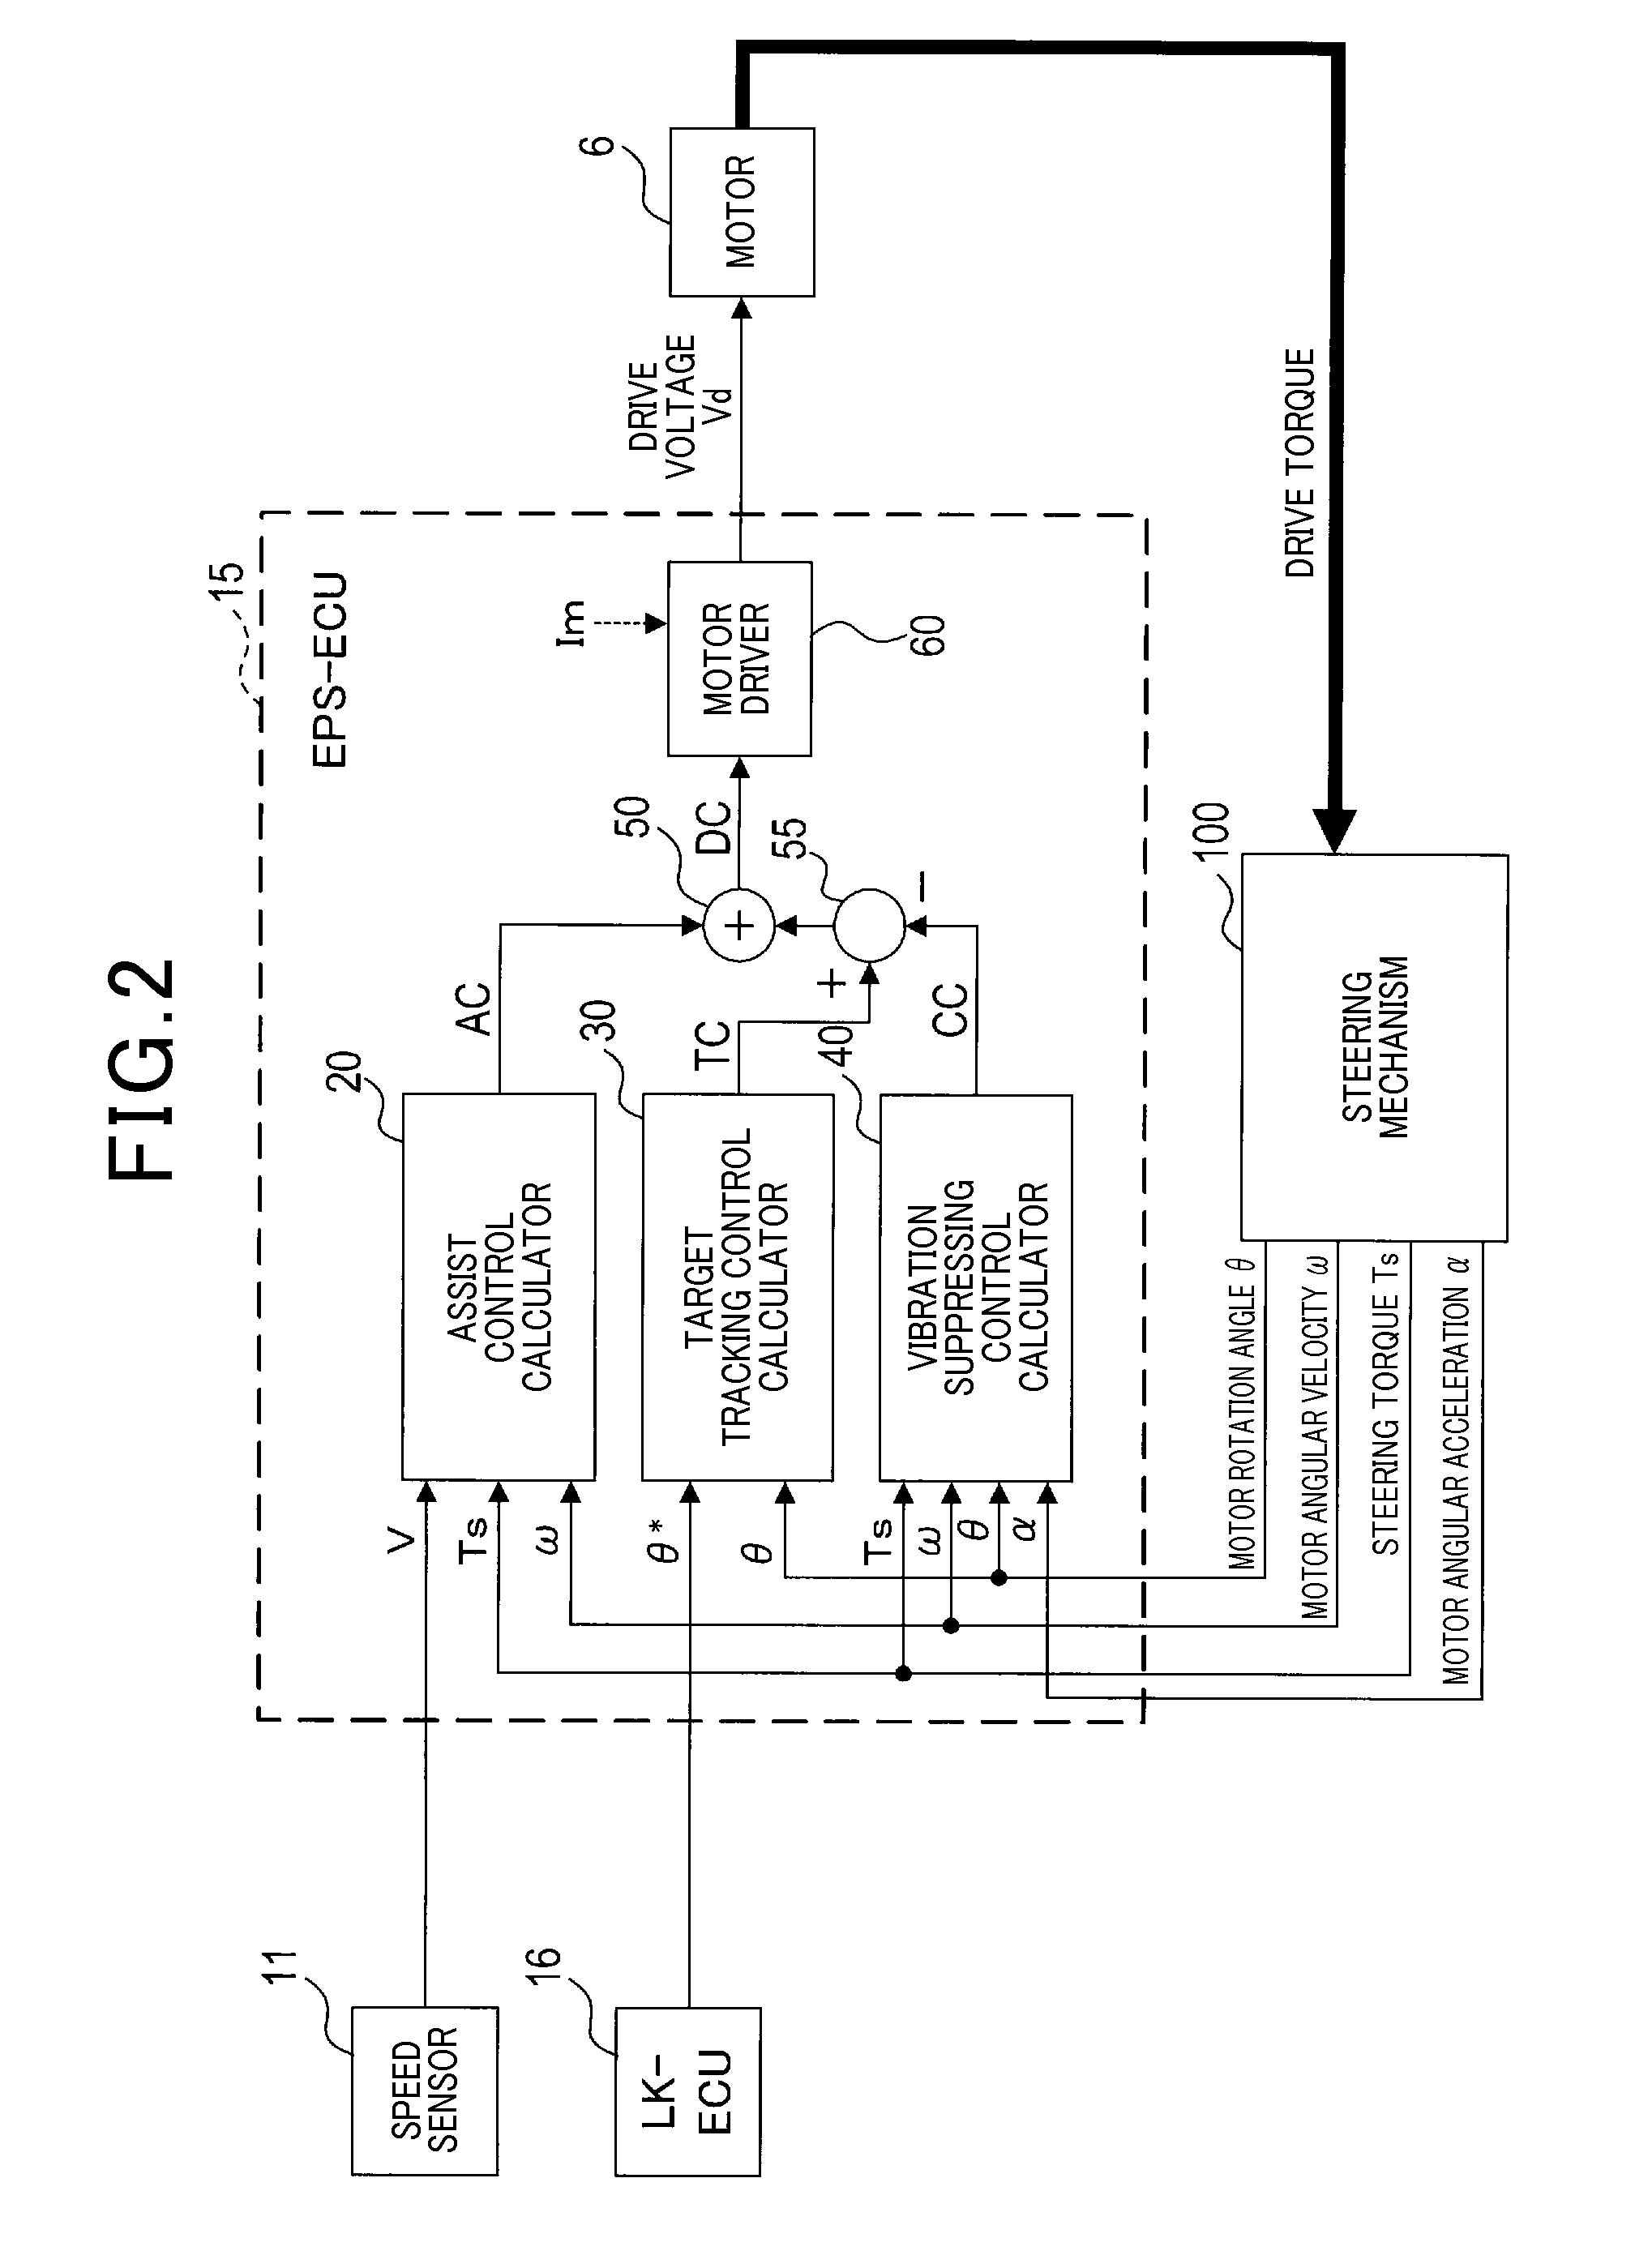 Electric power steering system with motor controller